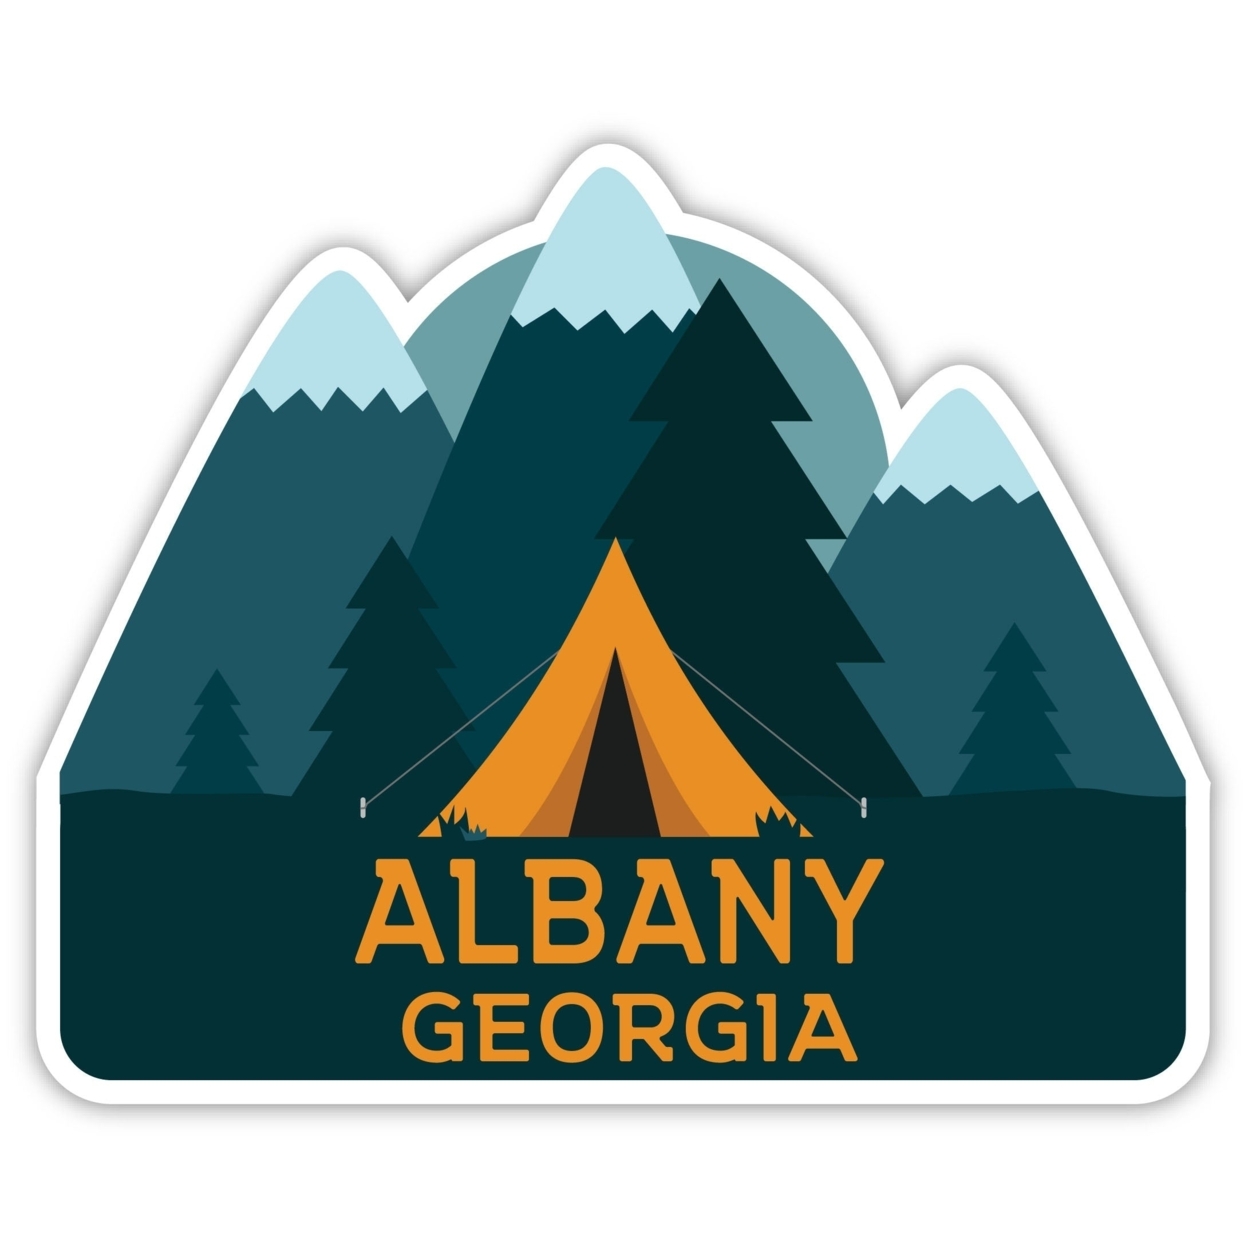 Albany Georgia Souvenir Decorative Stickers (Choose Theme And Size) - 4-Pack, 8-Inch, Tent